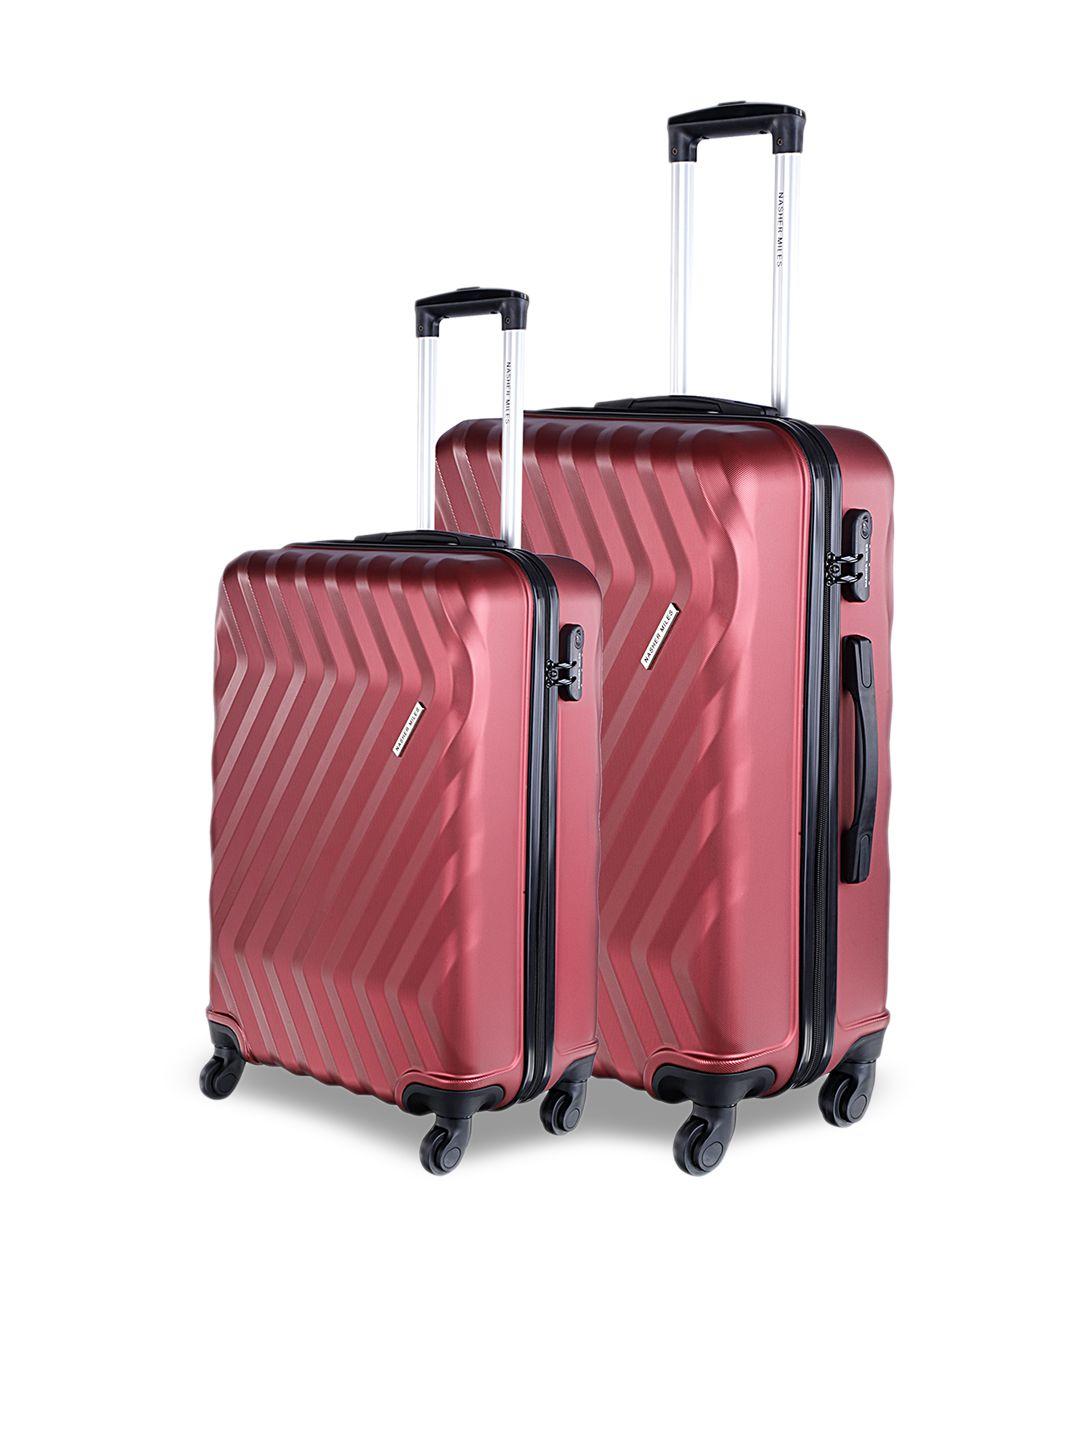 nasher miles unisex set of 2 maroon trolley suitcases nasher miles lombard